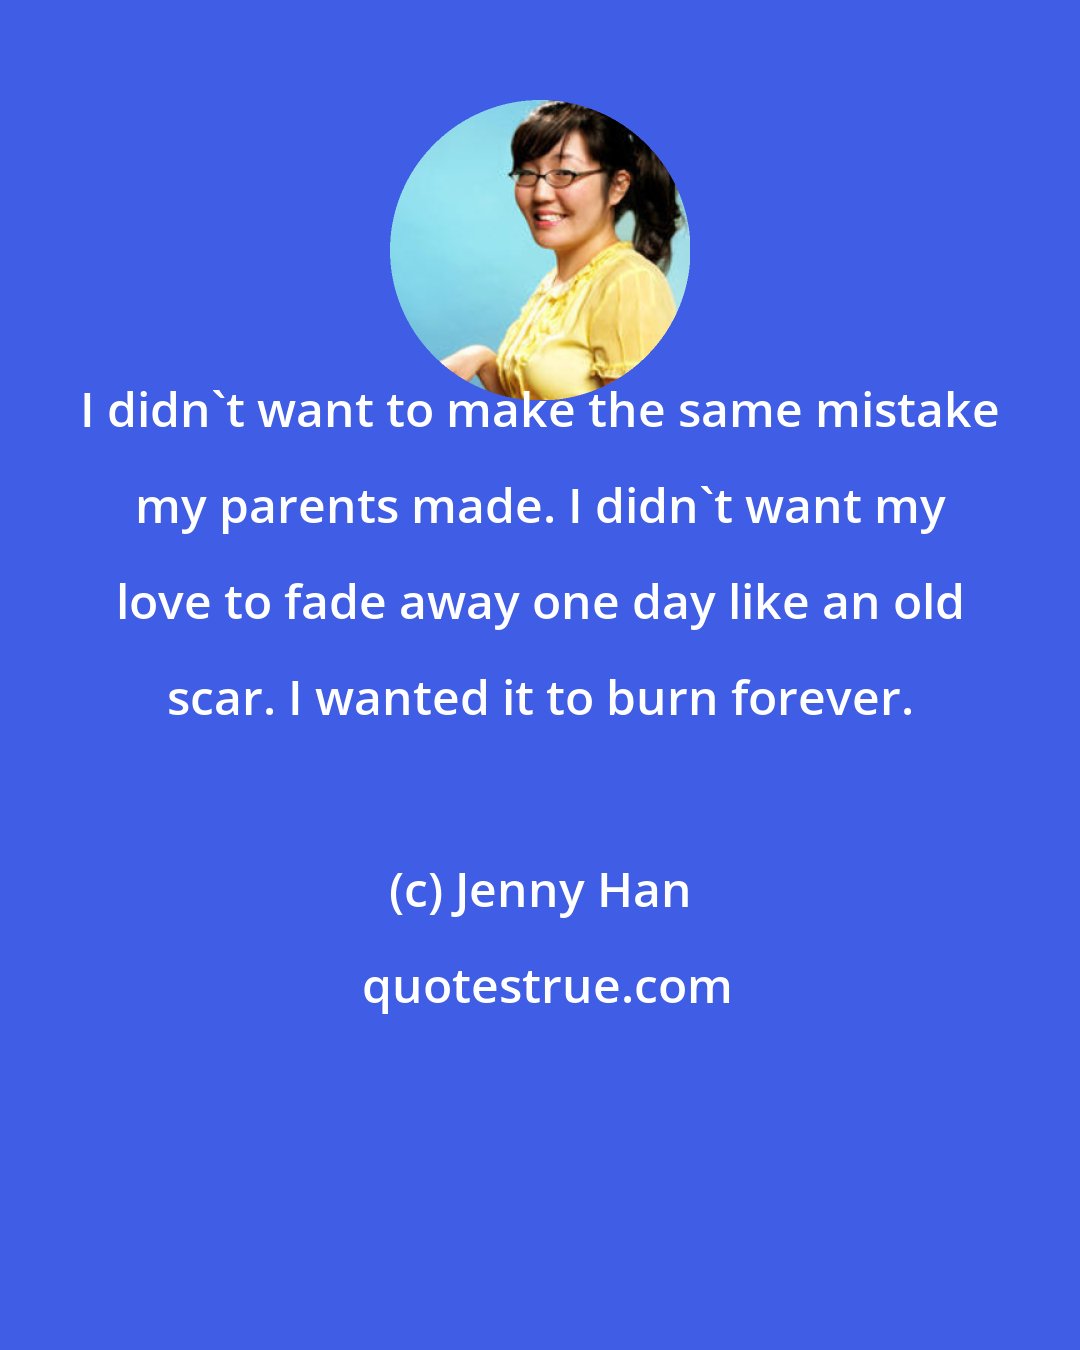 Jenny Han: I didn't want to make the same mistake my parents made. I didn't want my love to fade away one day like an old scar. I wanted it to burn forever.